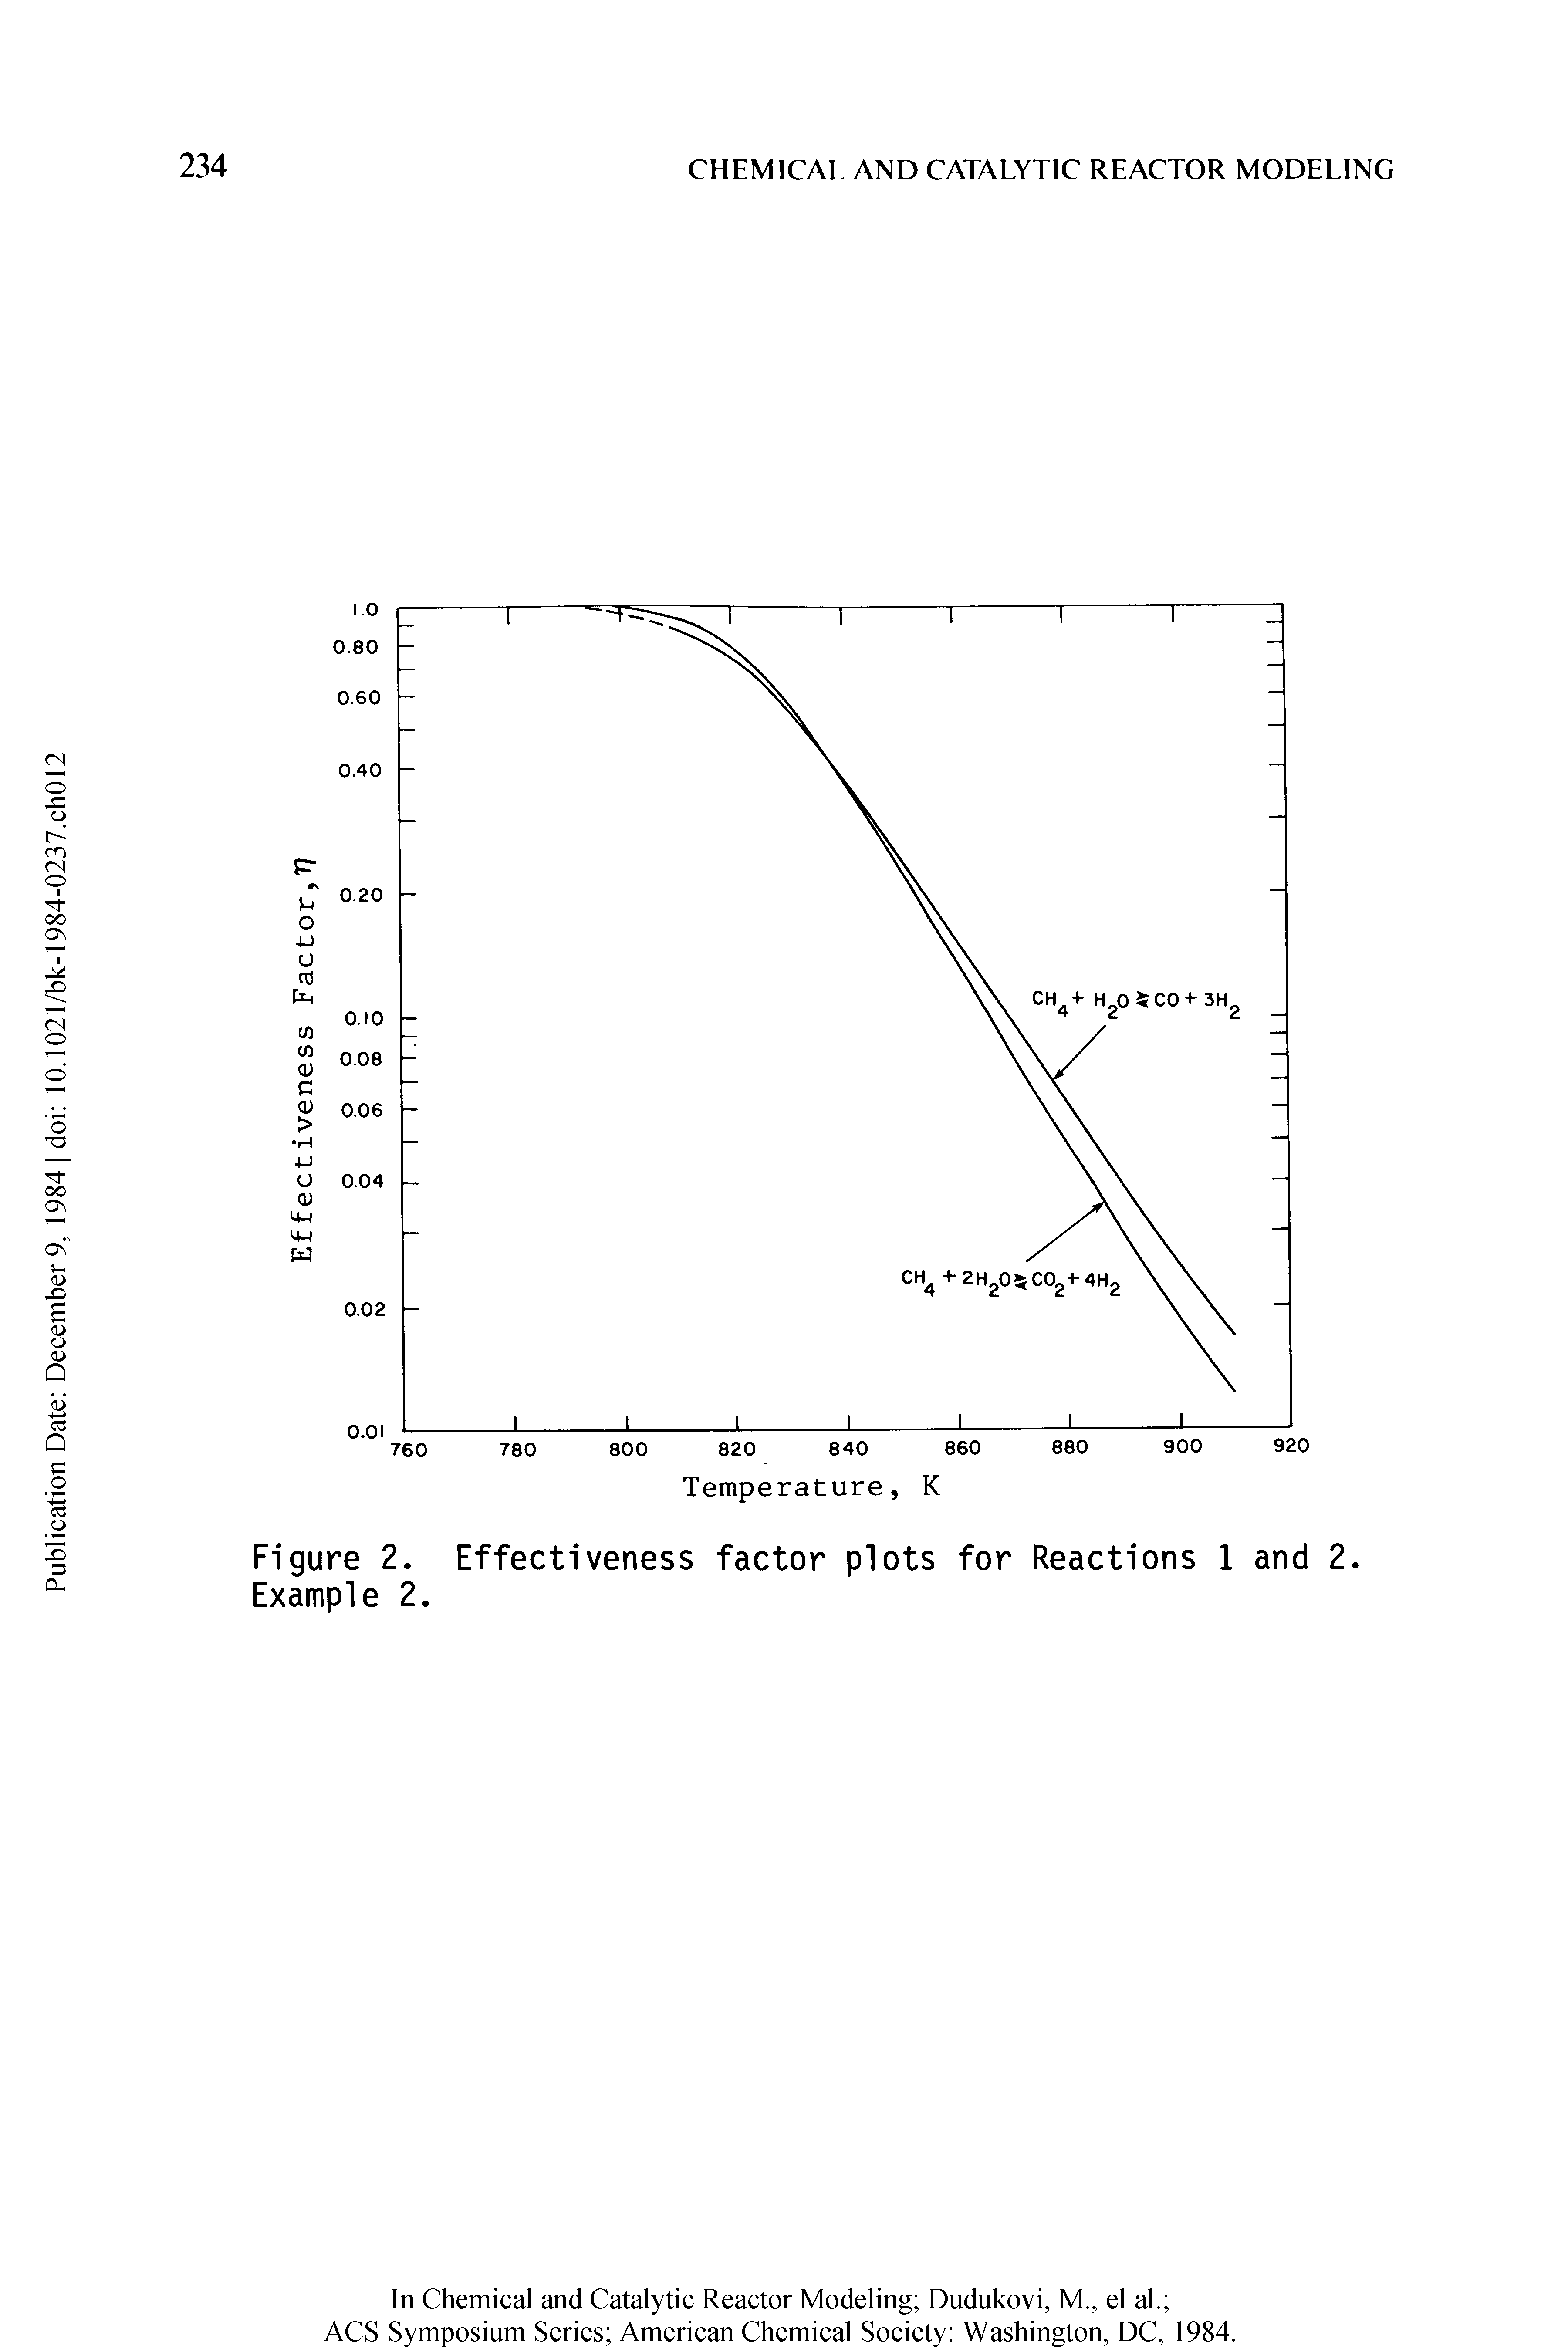 Figure 2. Effectiveness factor plots for Reactions 1 and 2. Example 2.